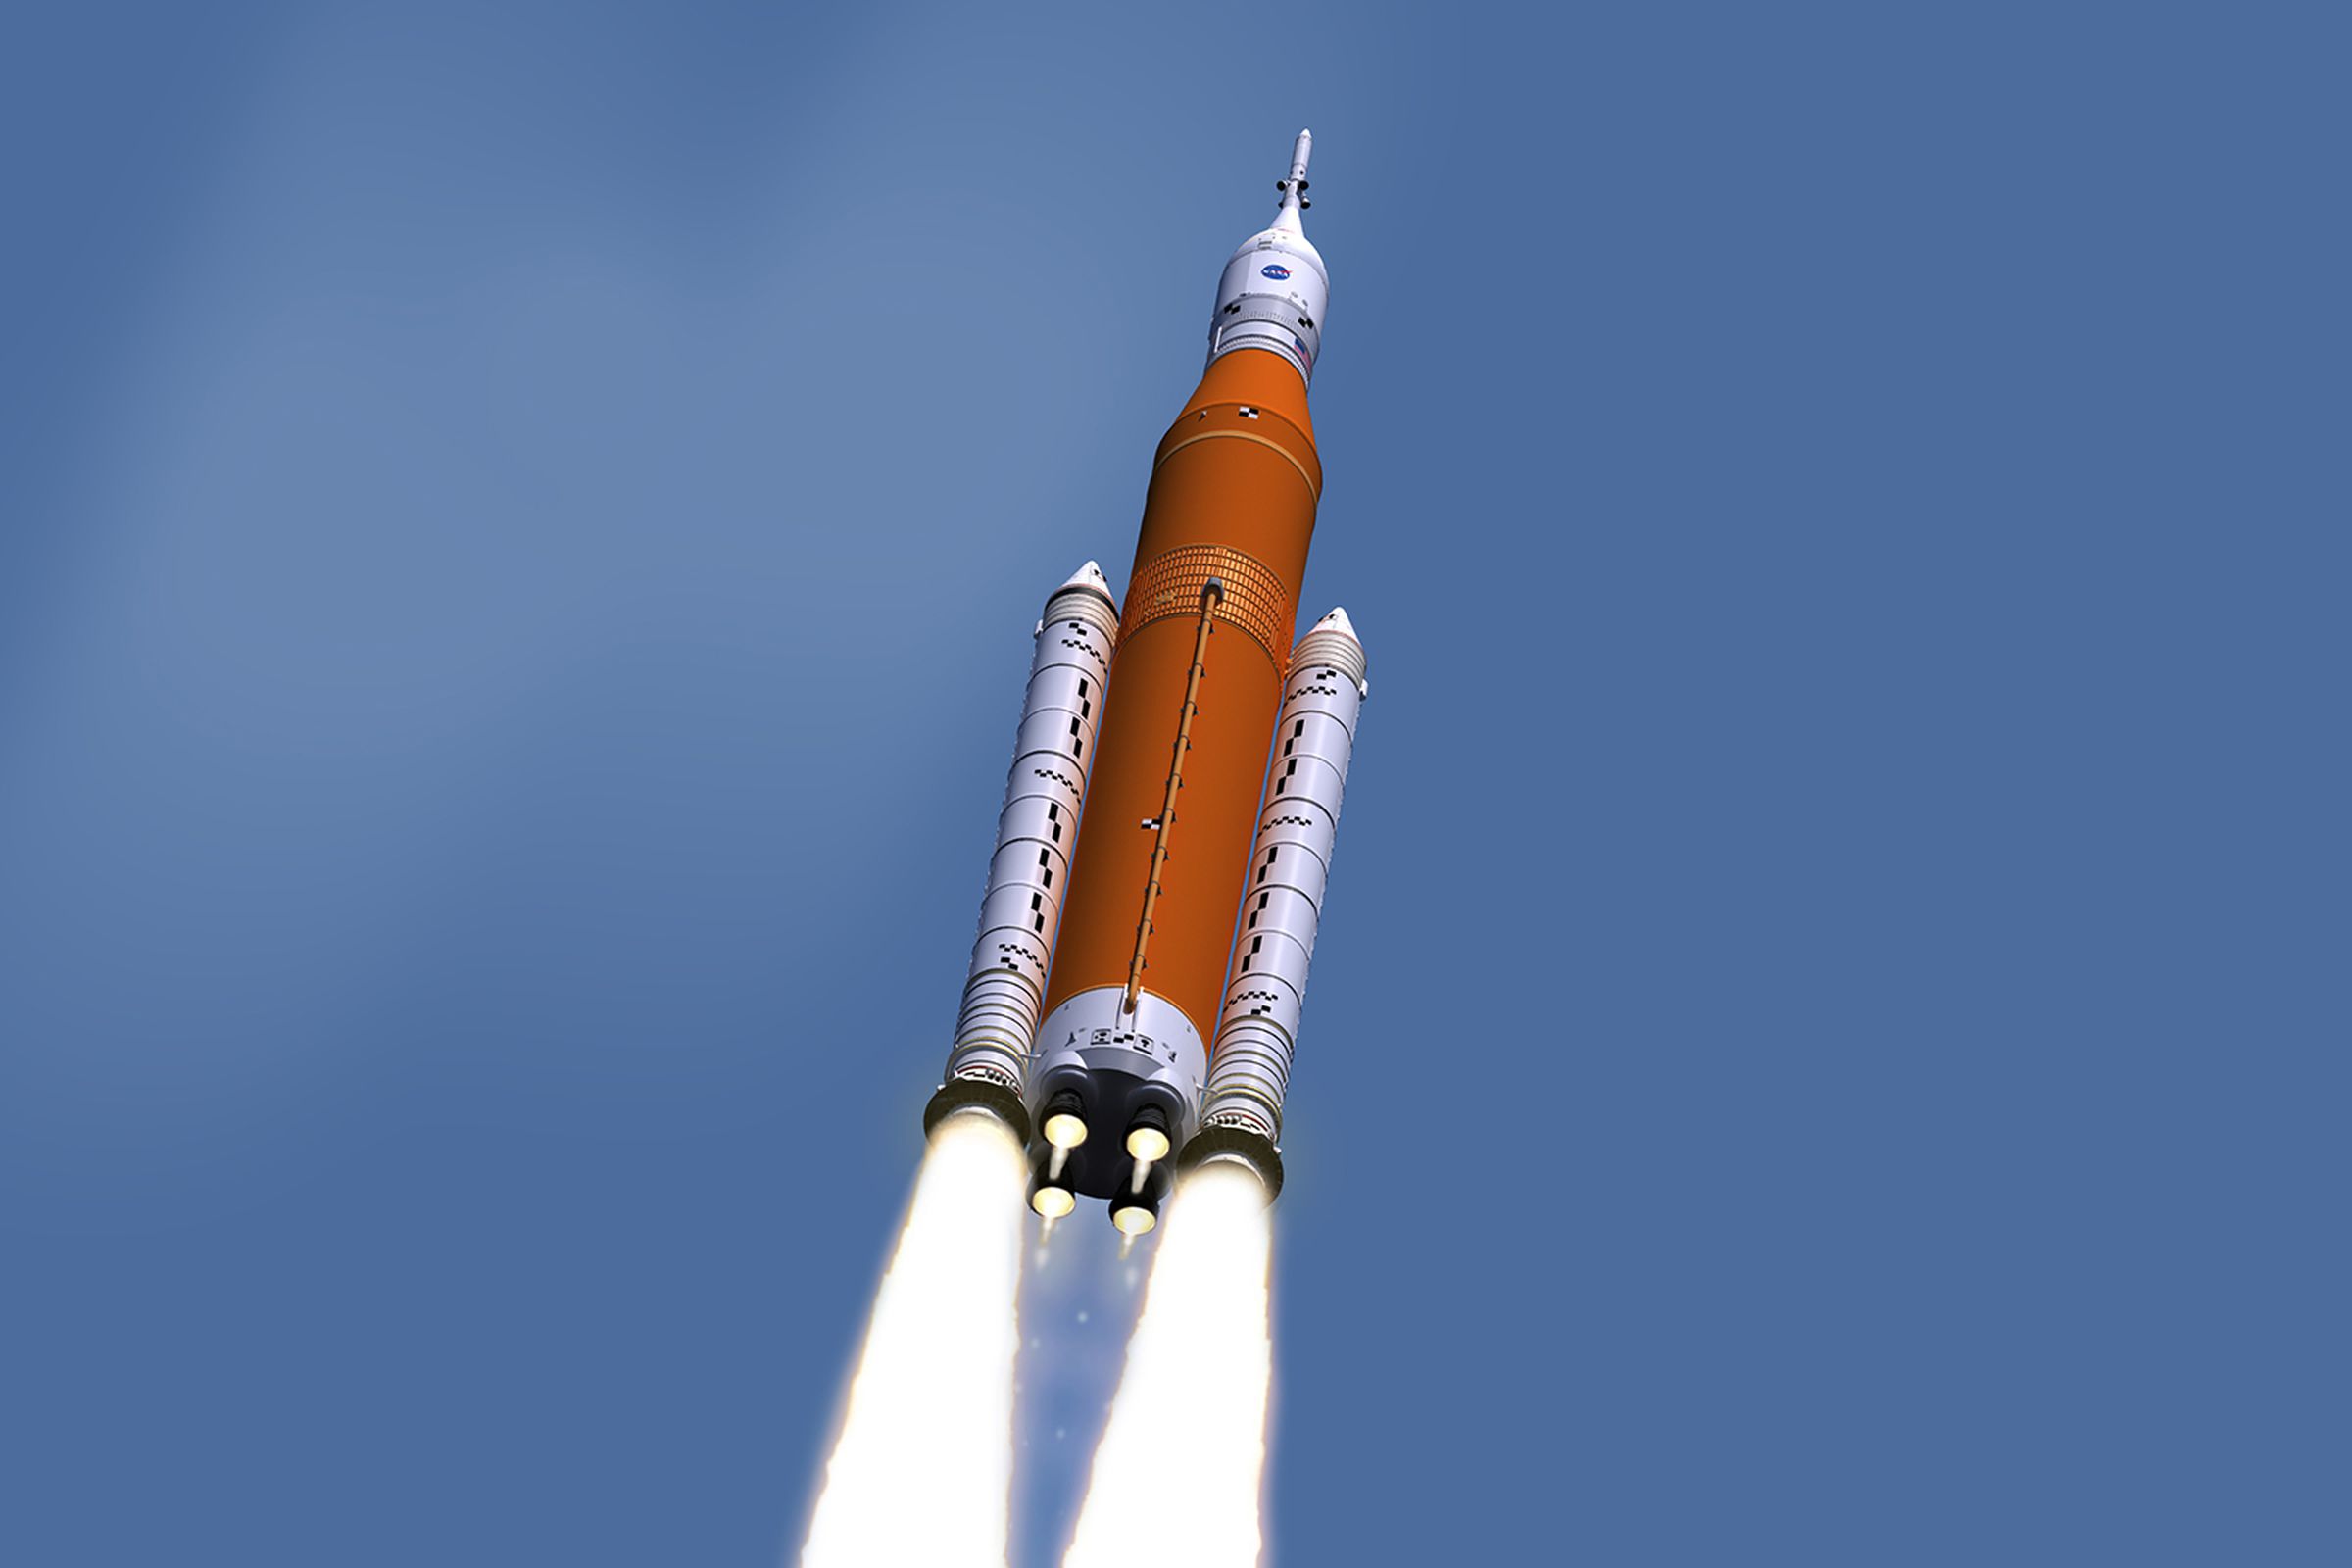 An artistic rendering of the Block 1 version of the SLS